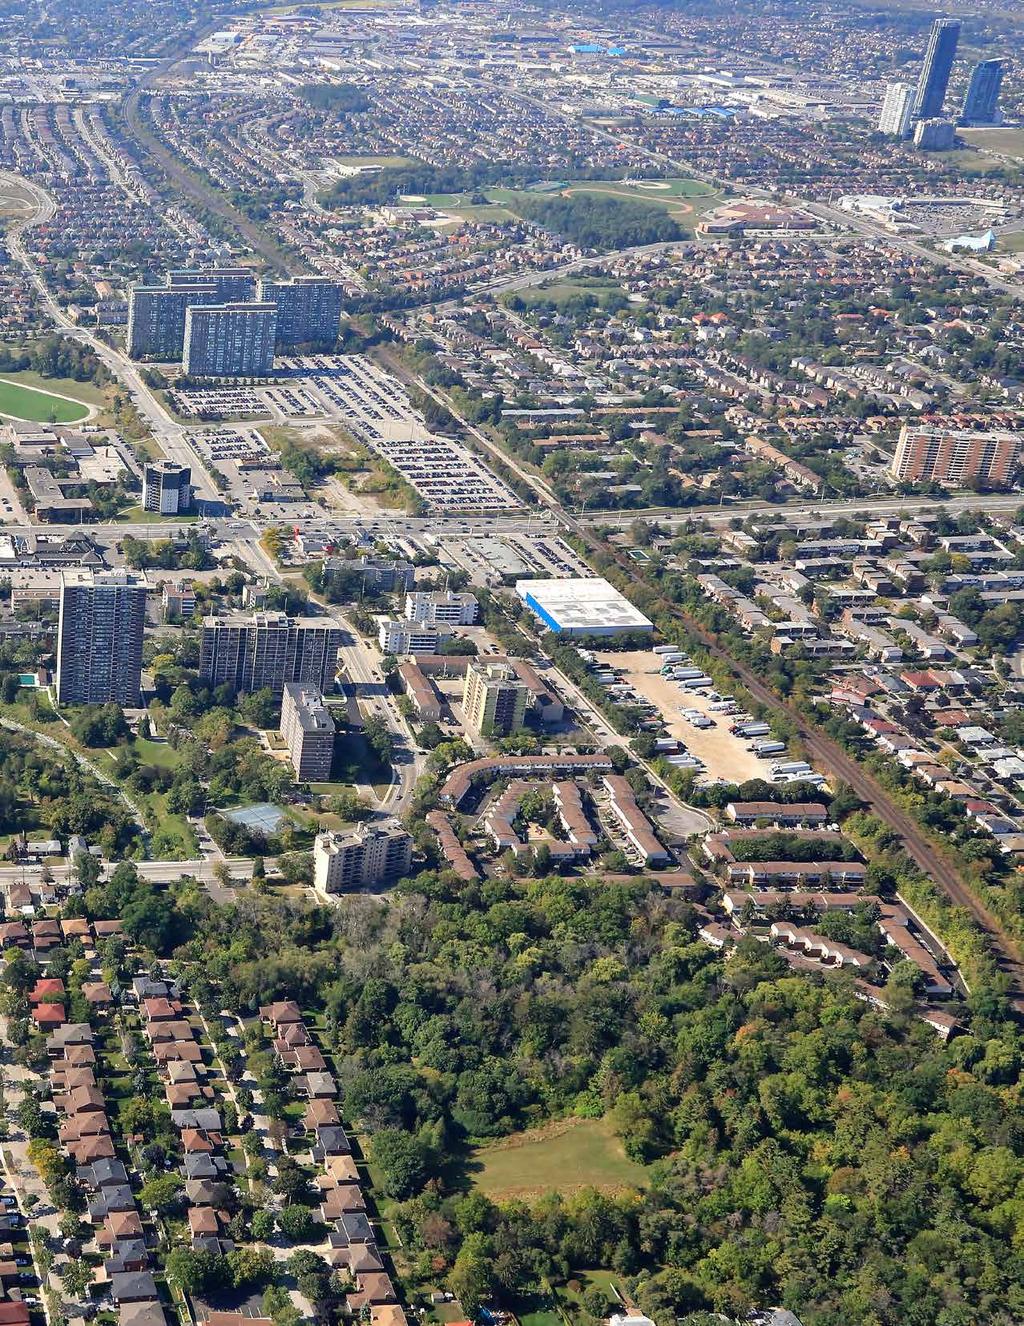 The Offering The Land Services Group is pleased to offer for sale the Properties at 0, 00, 0, 0 Kirwin Avenue and 0 Littlejohn Lane (The Property or Site ).